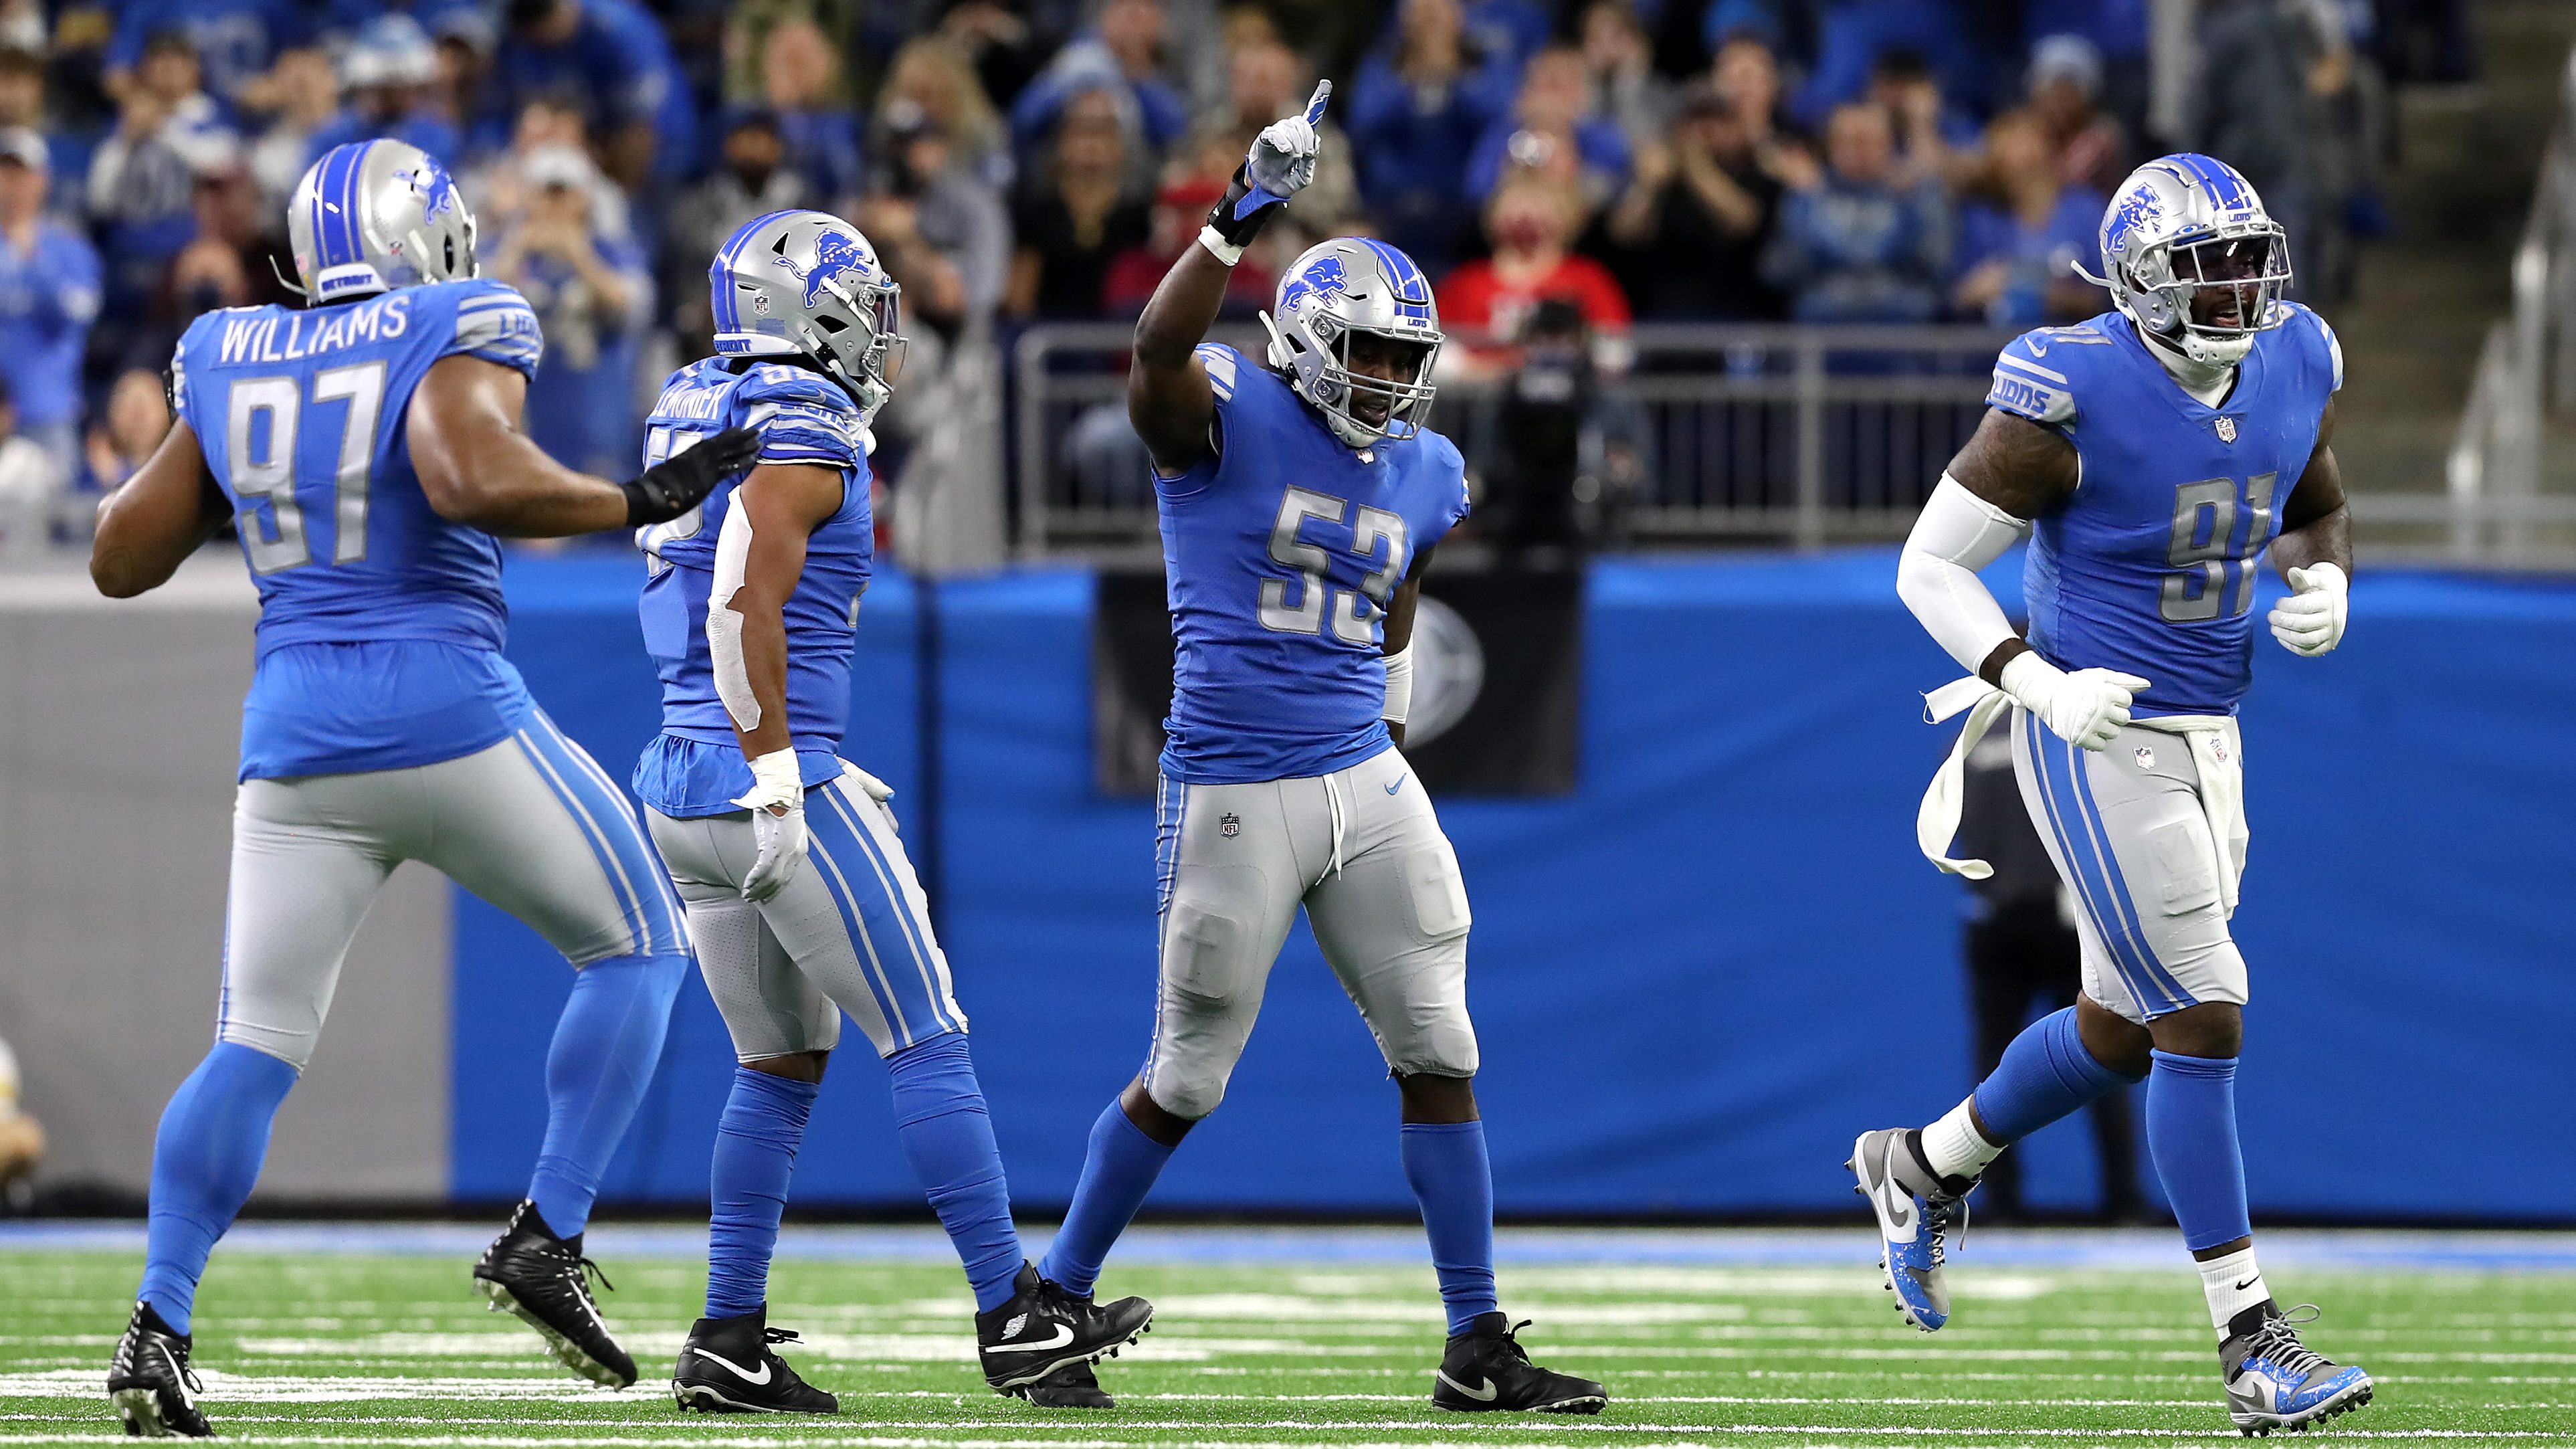 Detroit Lions' Riley Patterson: NFC Special Teams Player of Week